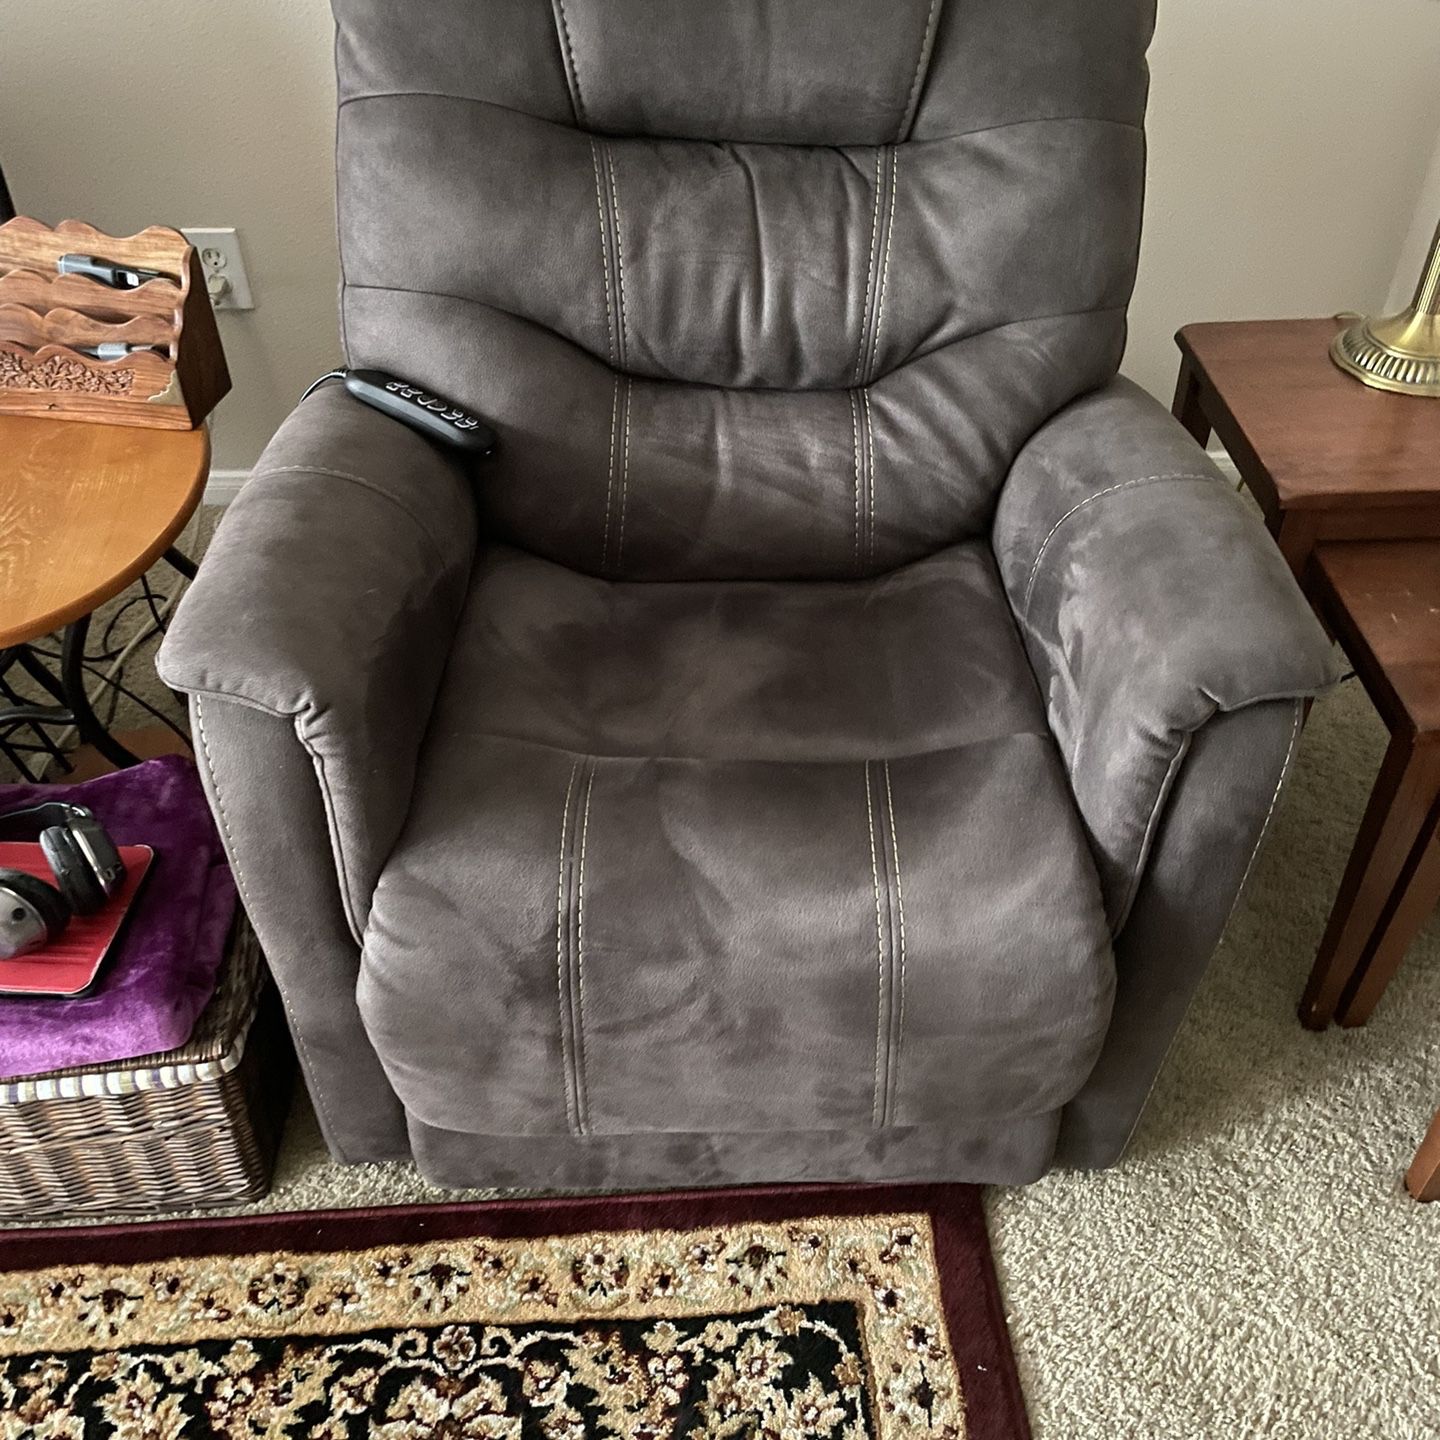 Lift Chair Make An Offer! Moving Sale! Check Out My Other Item! 